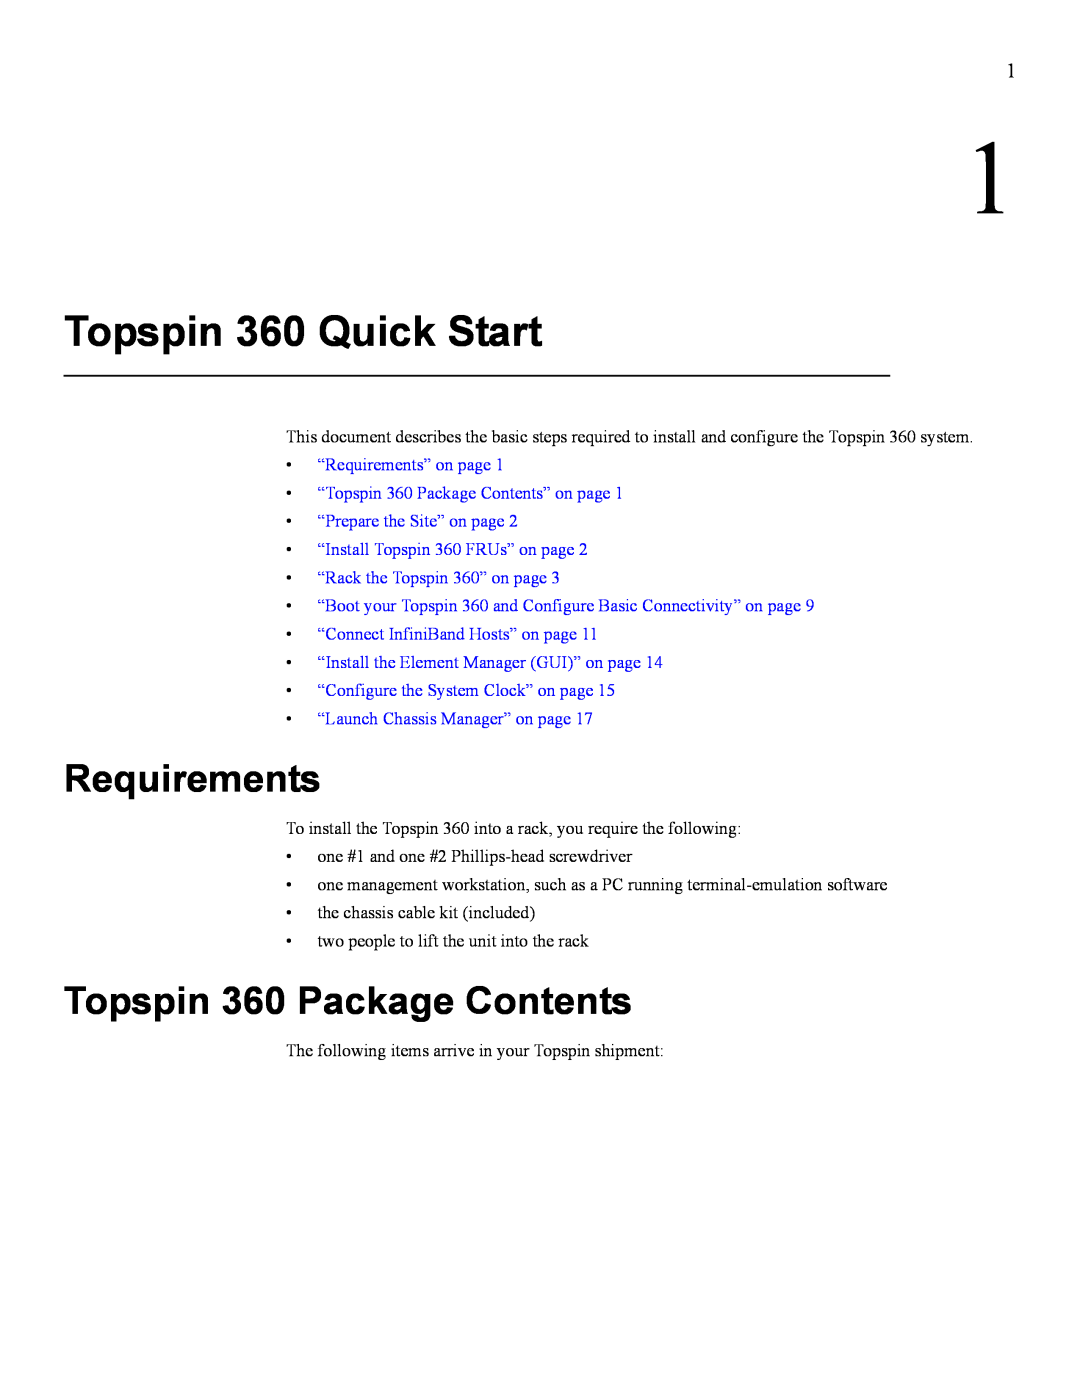 Cisco Systems SFS 3012 quick start Topspin 360 Quick Start, Requirements, Topspin 360 Package Contents 